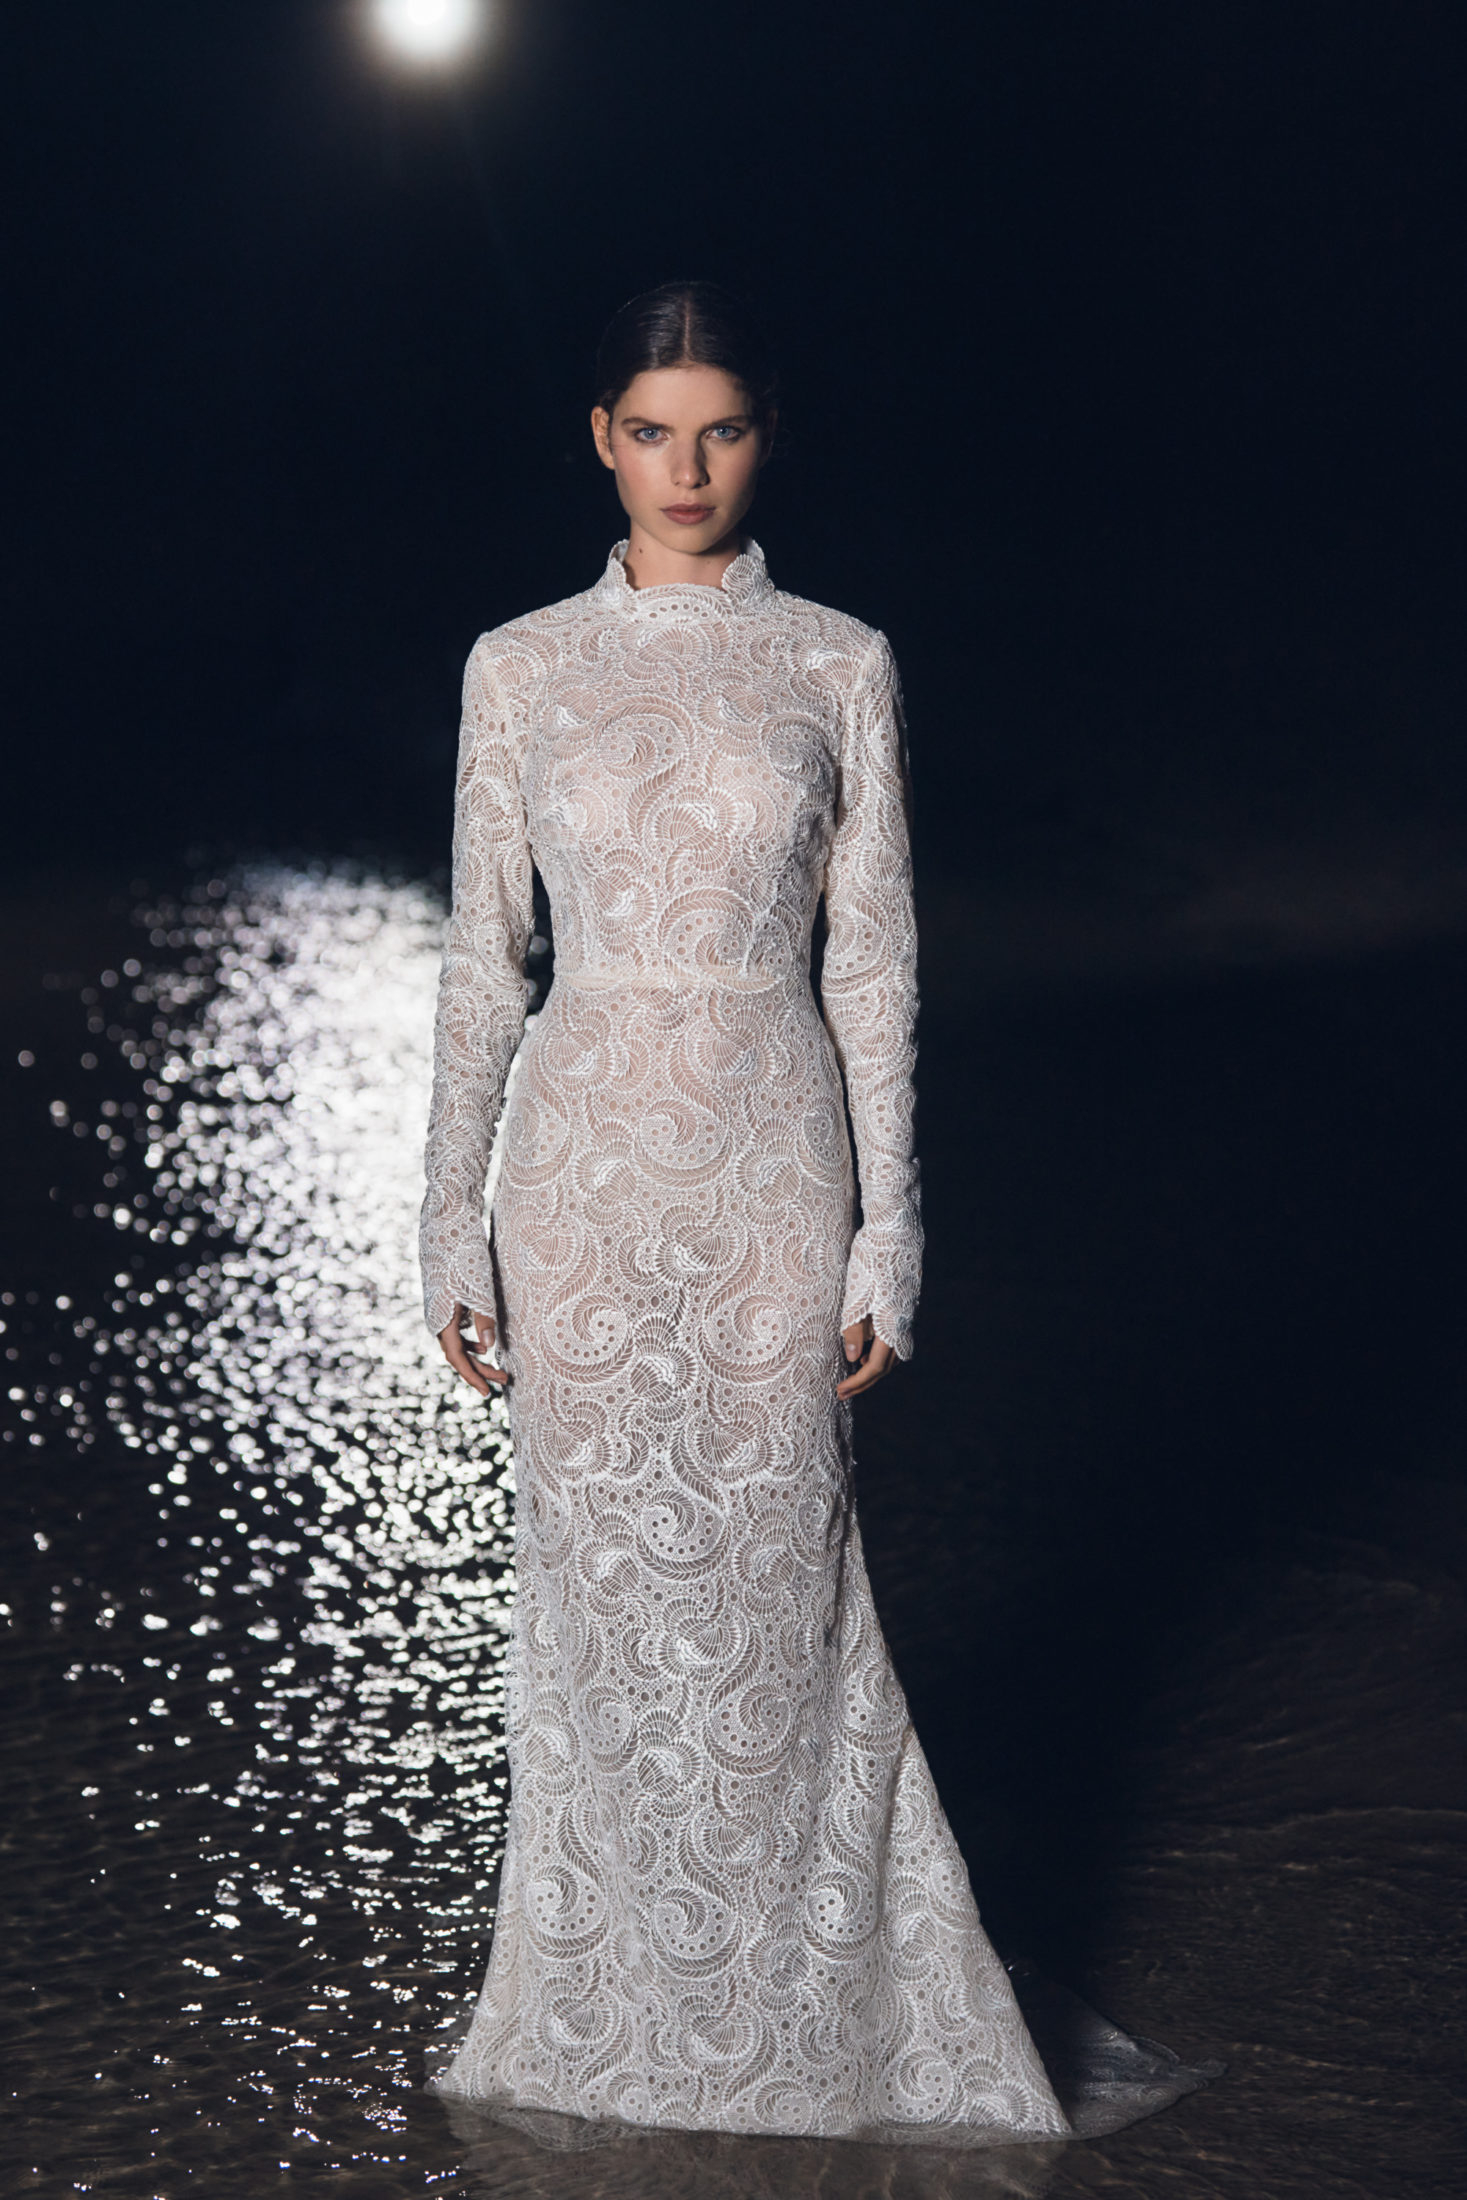 Embroidered wedding gown by Ella Moda, featured on The Lane Fall 2022 Bridal Week Runway.